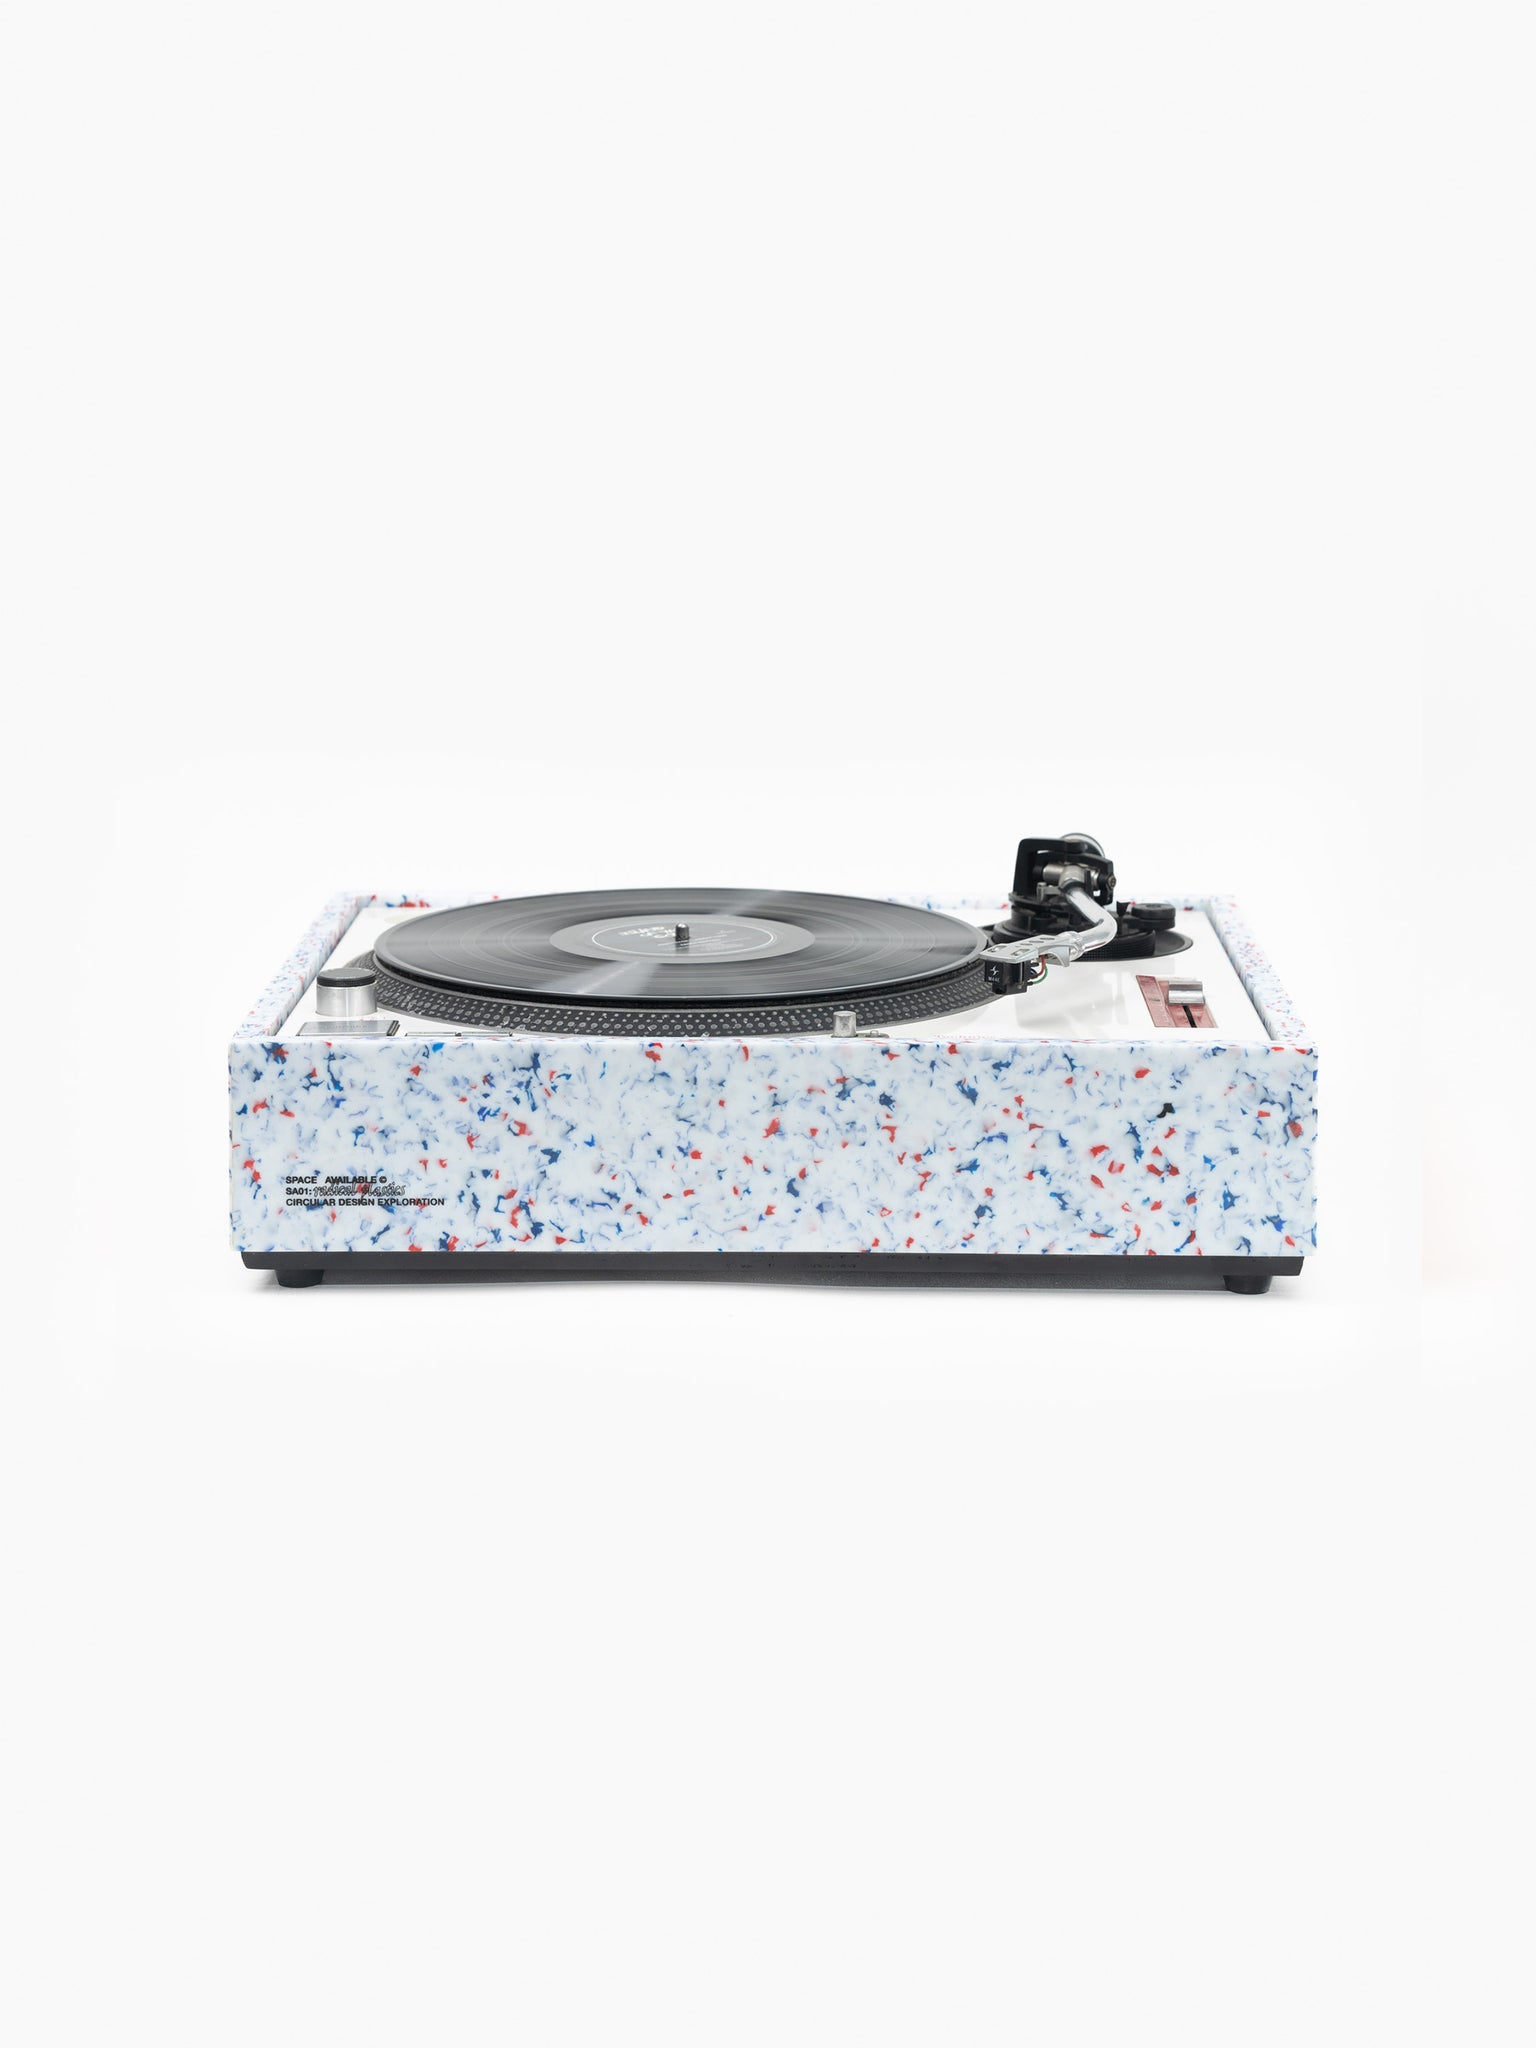 Turntable Casing White